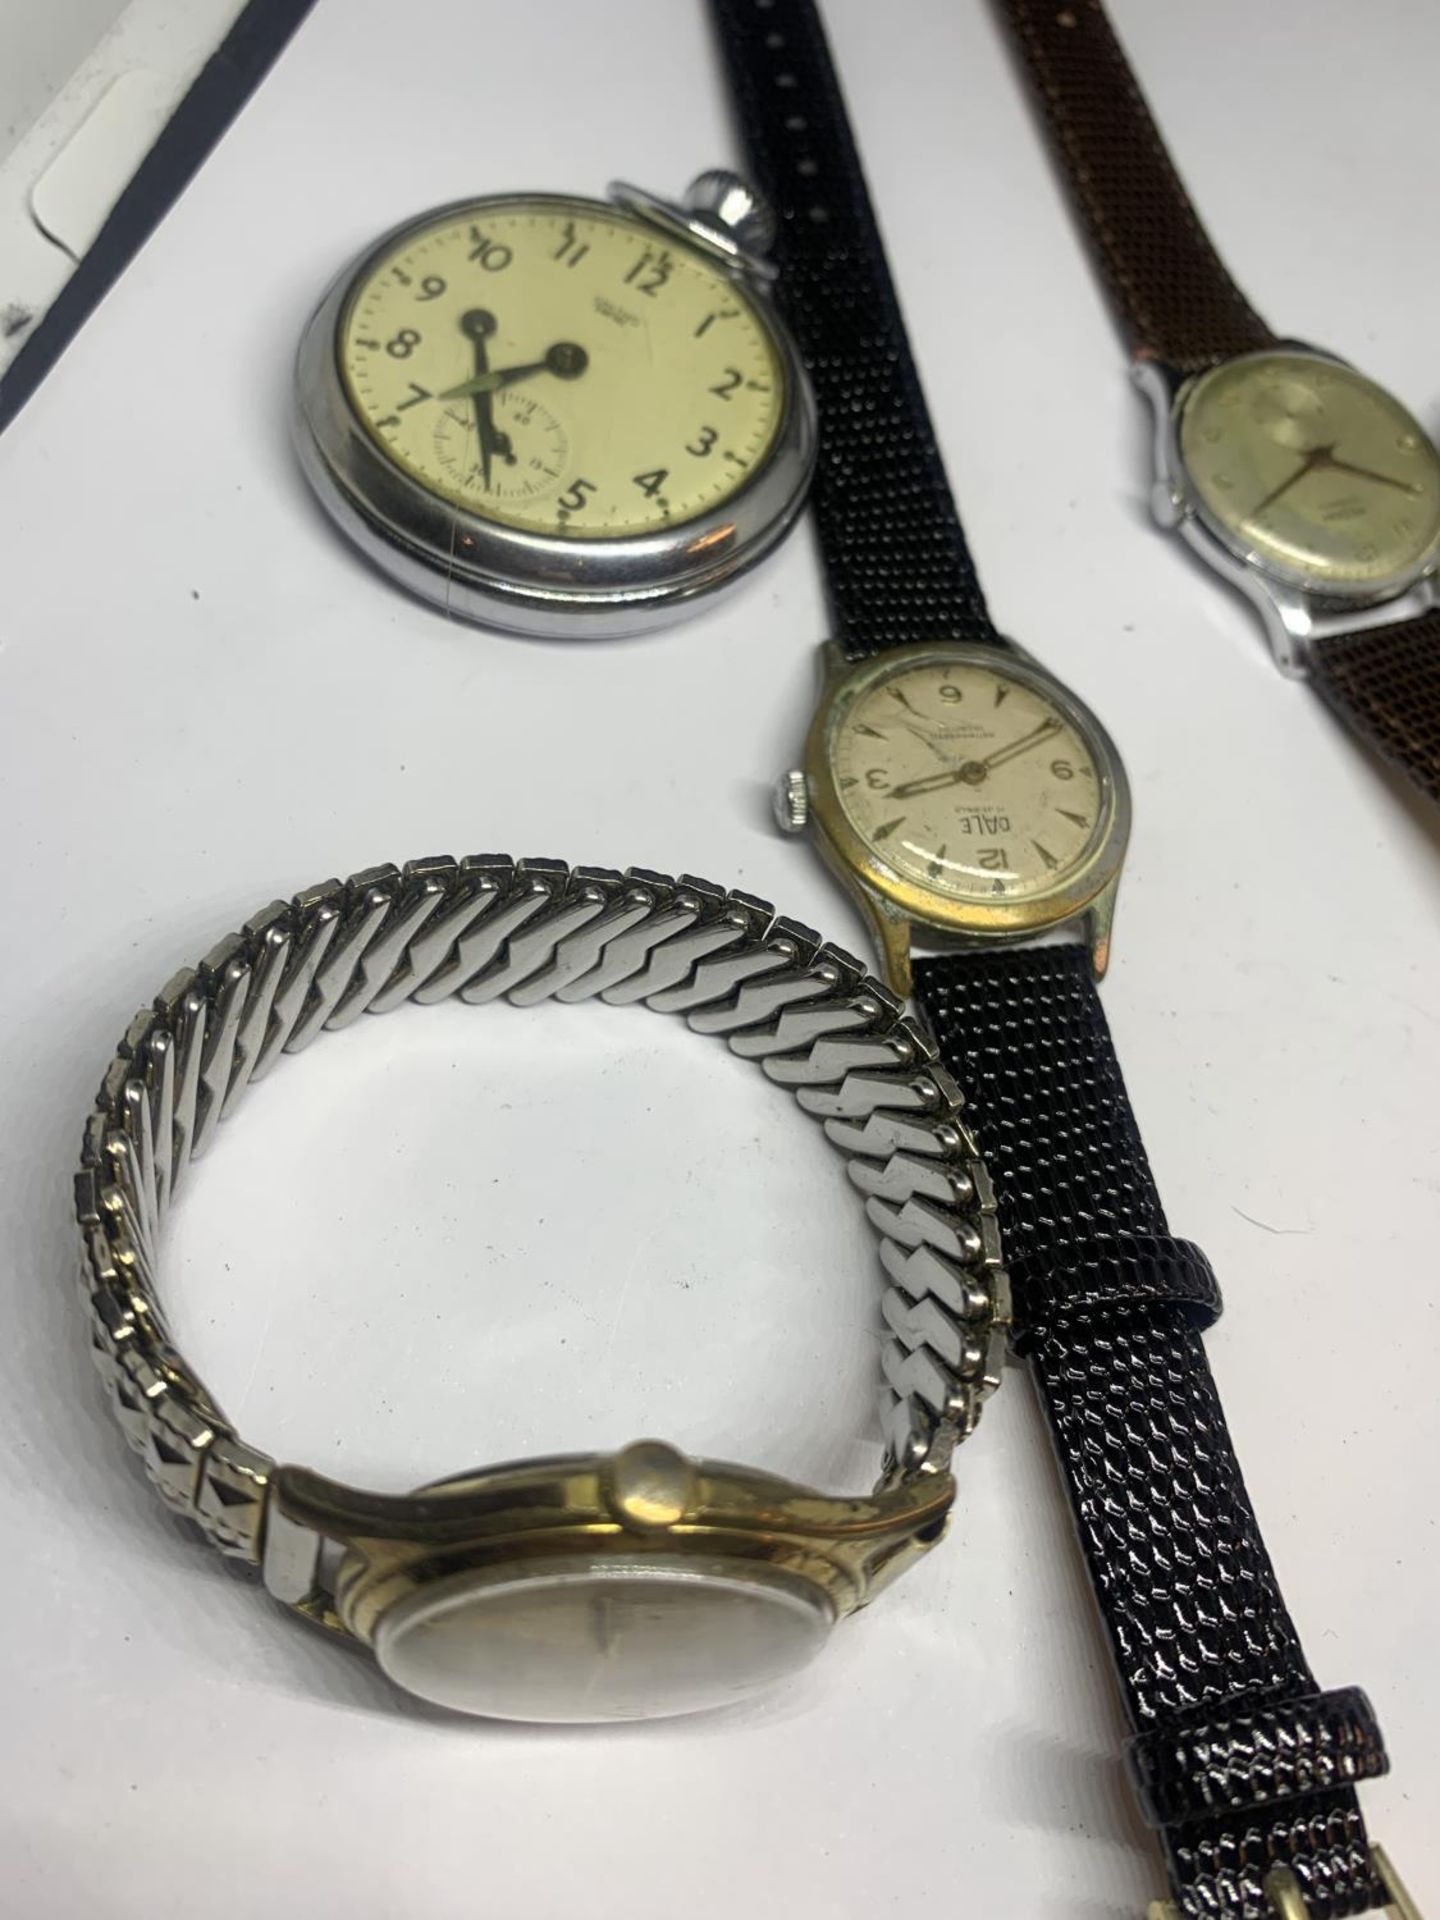 SIX VARIOUS WRIST AND POCKET WATCHES - Image 2 of 4